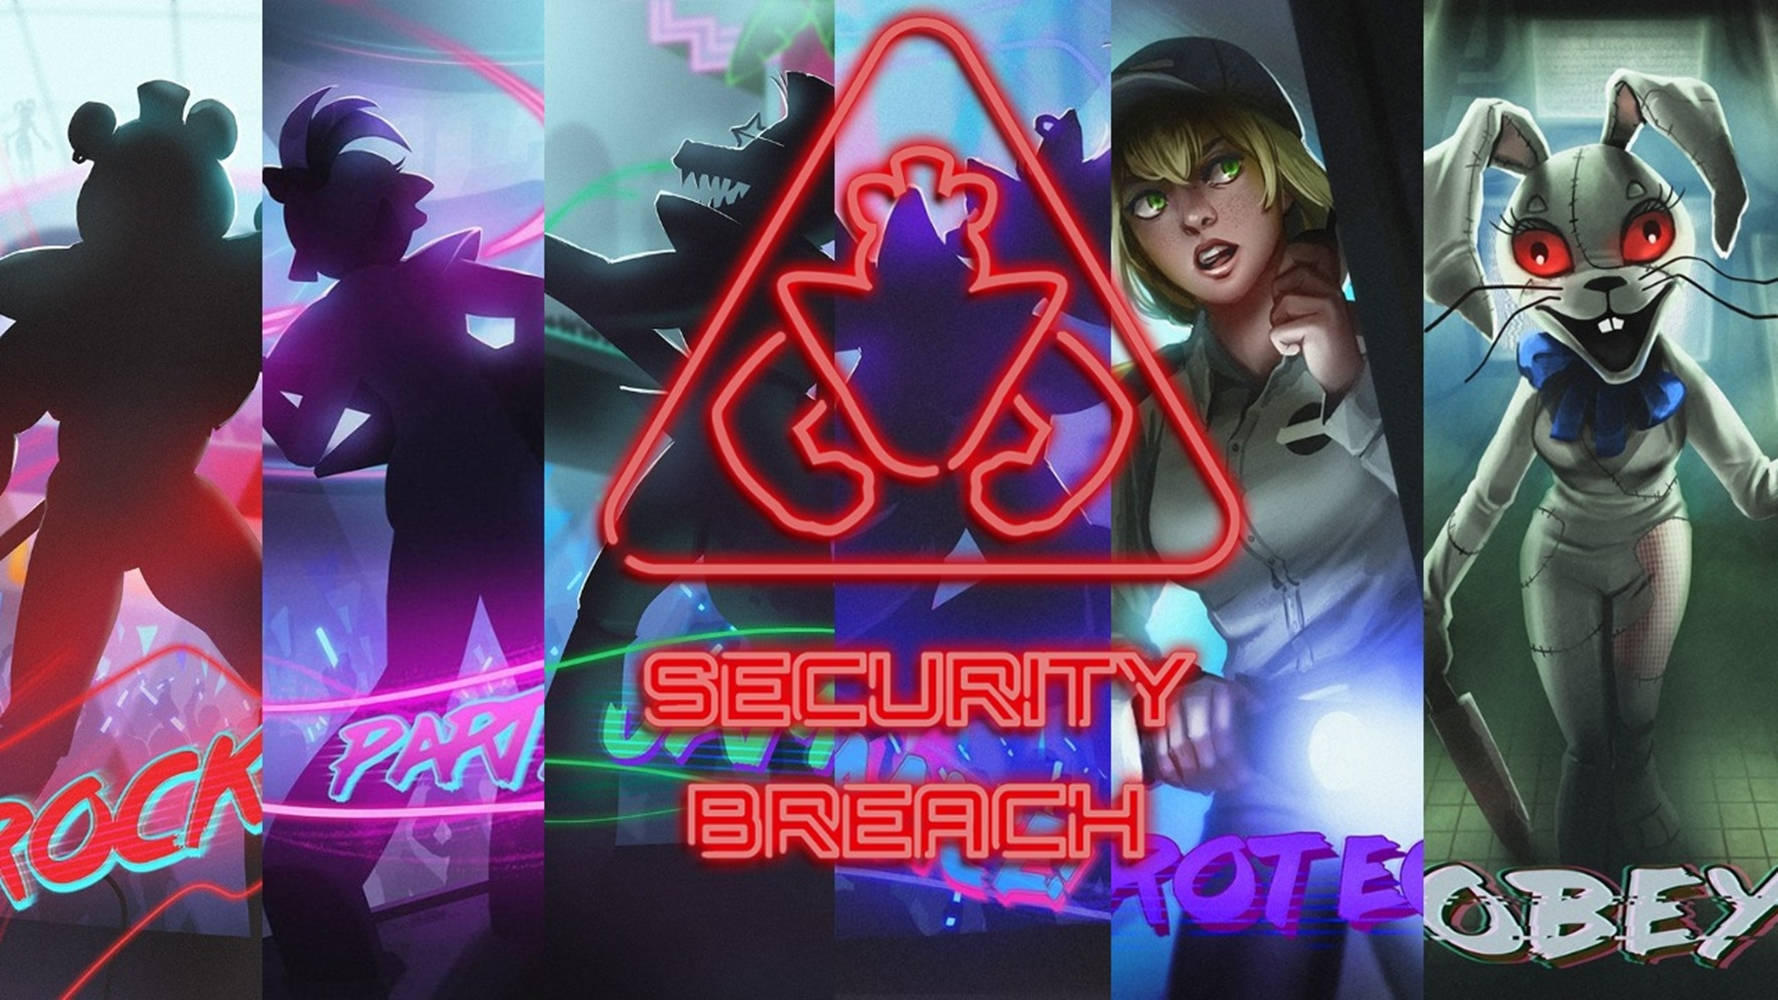 Five Nights At Freddy's Security Breach Collage Wallpaper